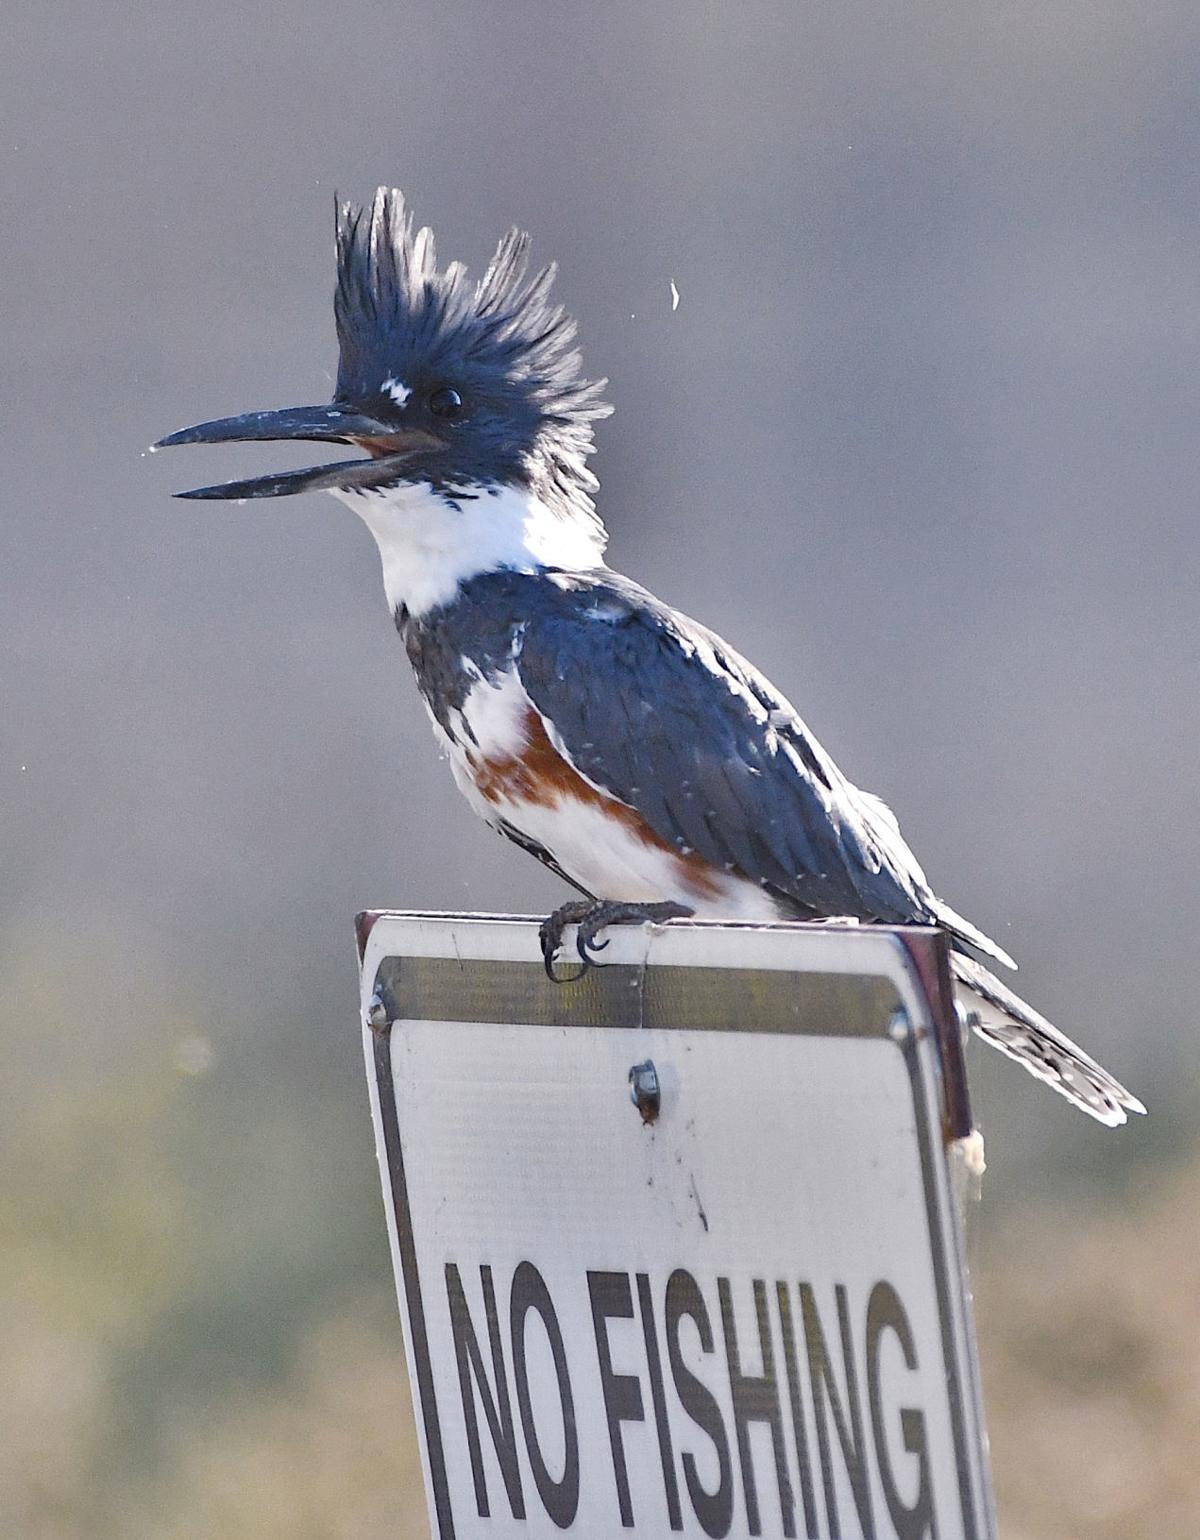 All we want for the holidays is a belted kingfisher in a fir tree